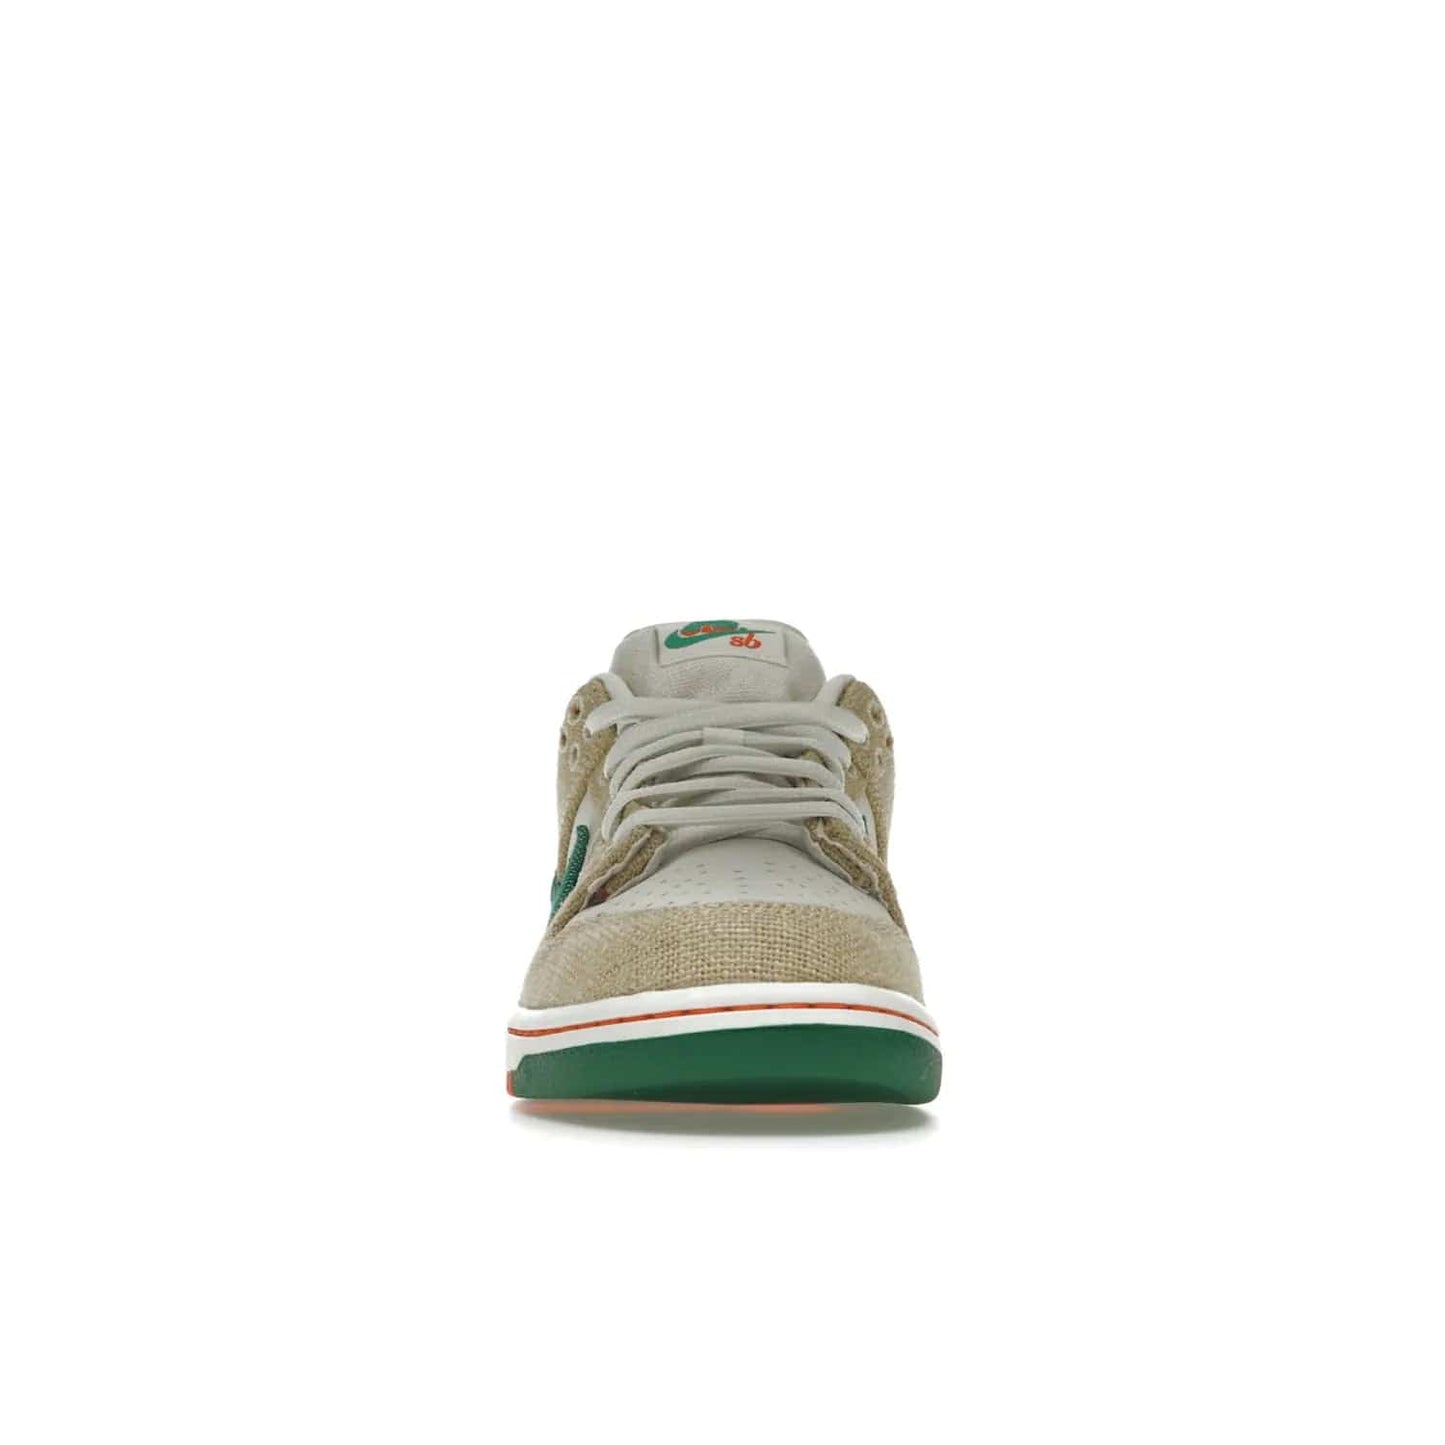 Nike SB Dunk Low Jarritos - Image 10 - Only at www.BallersClubKickz.com - Shop limited edition Nike SB Dunk Low Jarritos! Crafted with white leather and tear-away canvas materials with green accents. Includes orange, green, and white laces to customize your look. Available now.